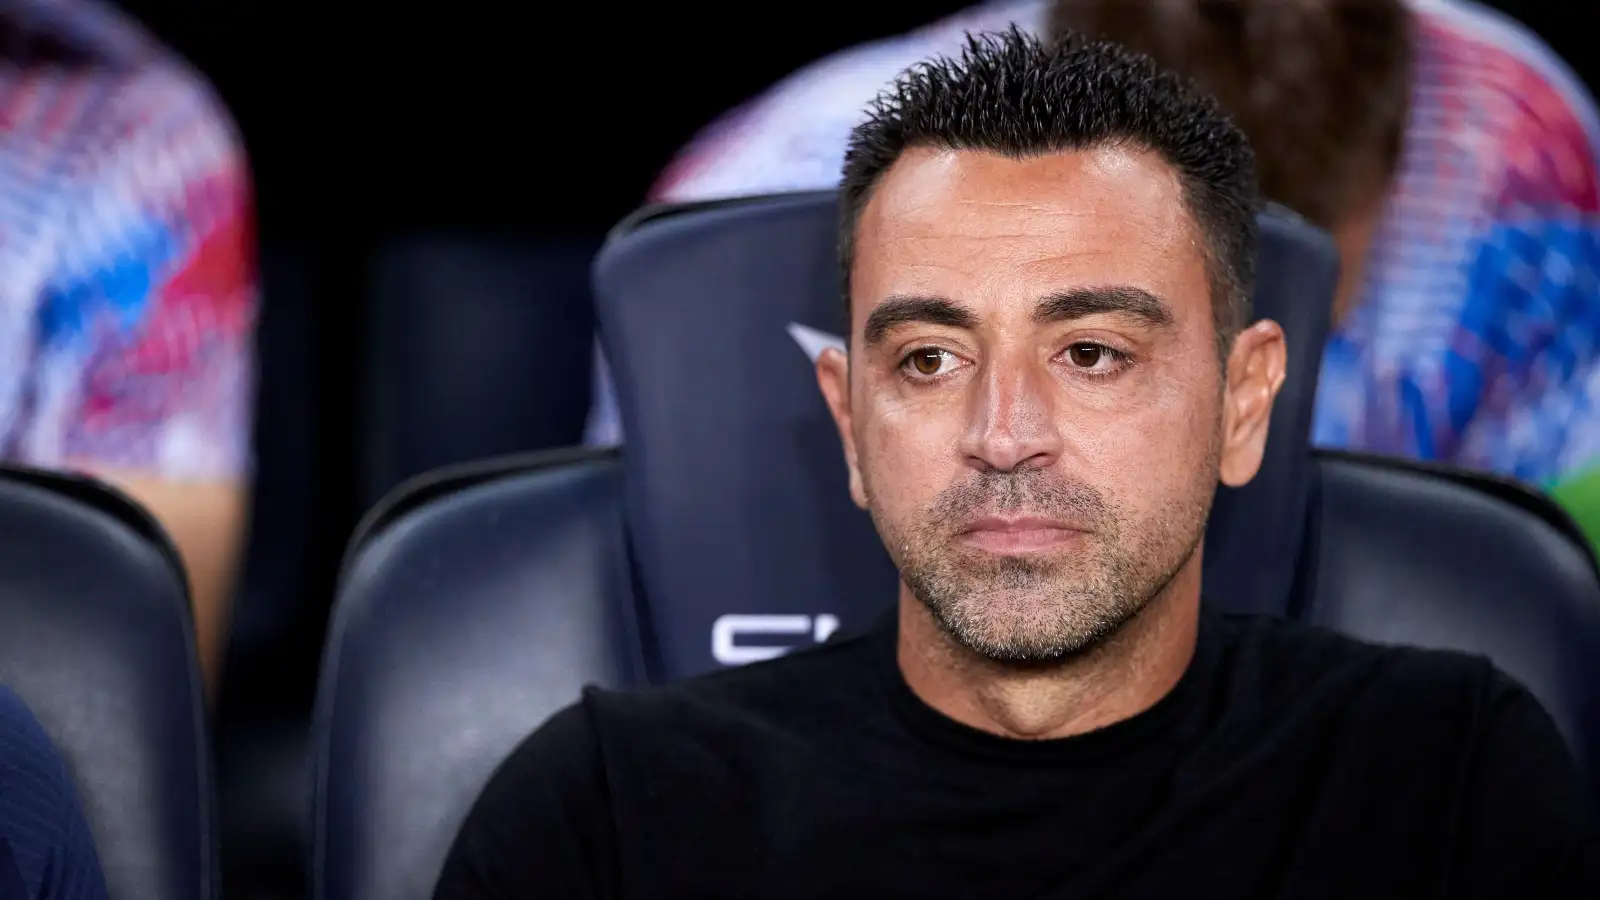 Can you name every player that Xavi has used at Barcelona?